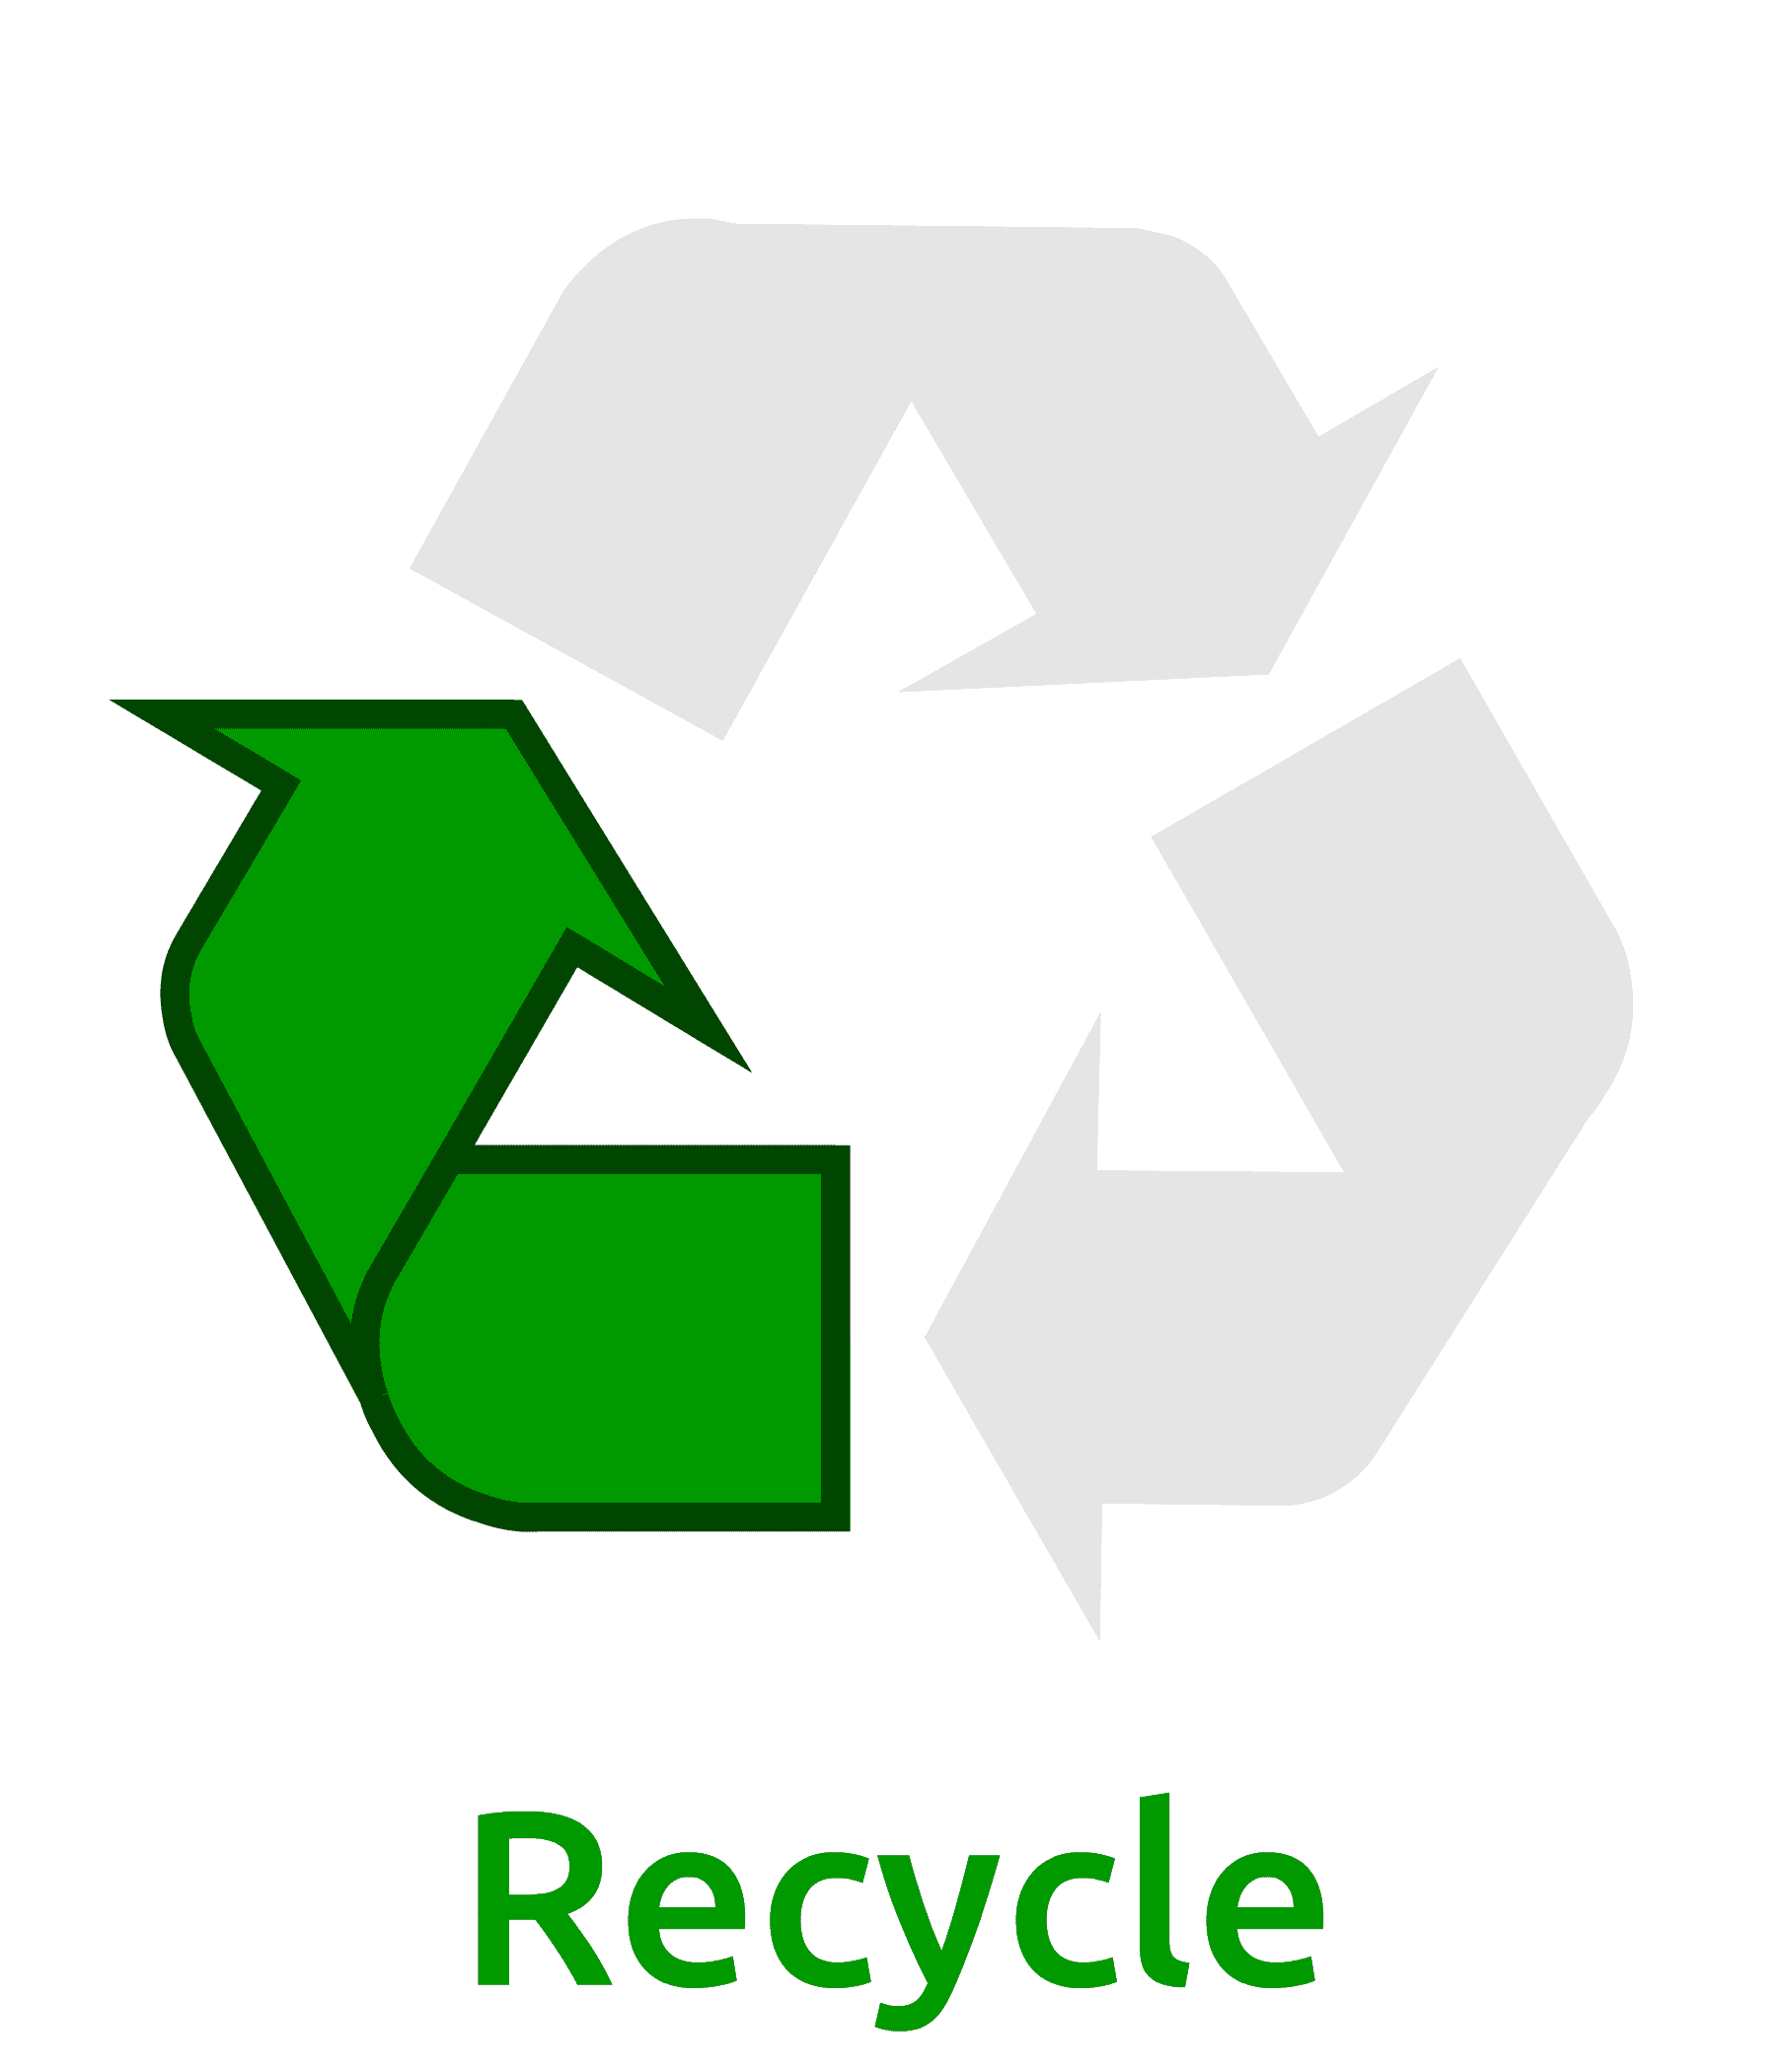 Sustainability - Recycle